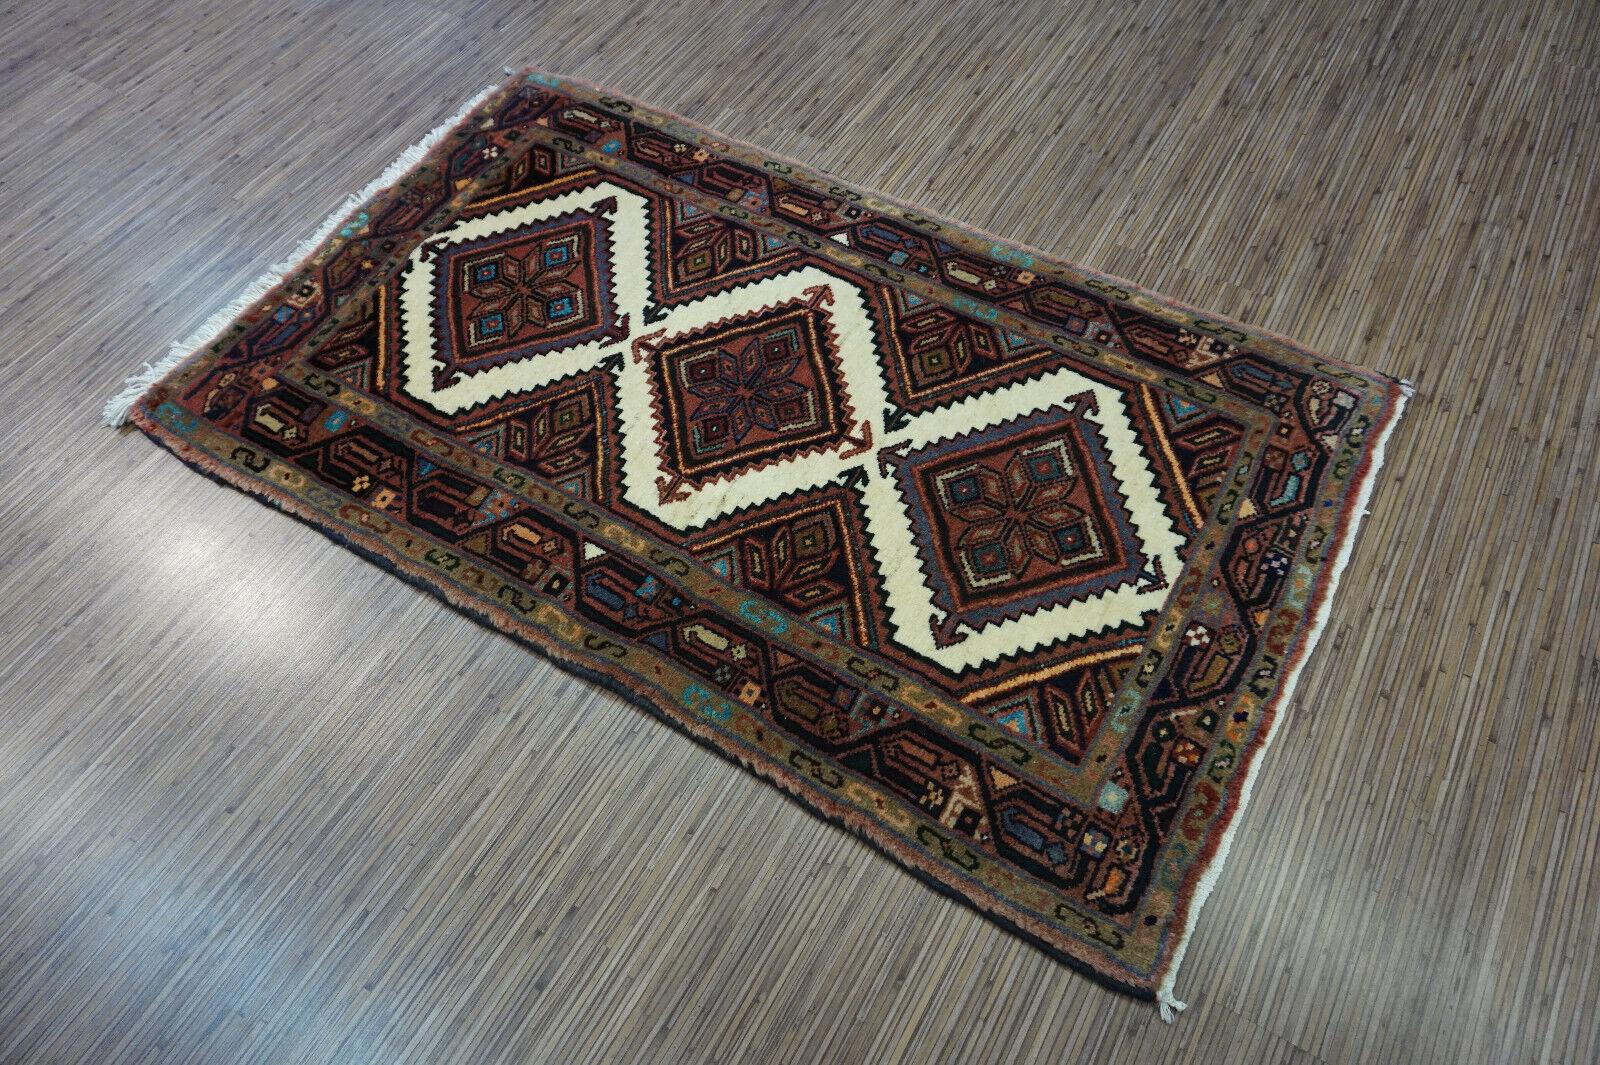 Bring home a piece of Persian artistry with this Handmade Vintage Persian Style Hamadan Rug. This rug was made in the 1970s, using high-quality wool material that is soft and durable. The rug measures 2.3’ x 3.9’ or 71cm x 121cm, making it suitable